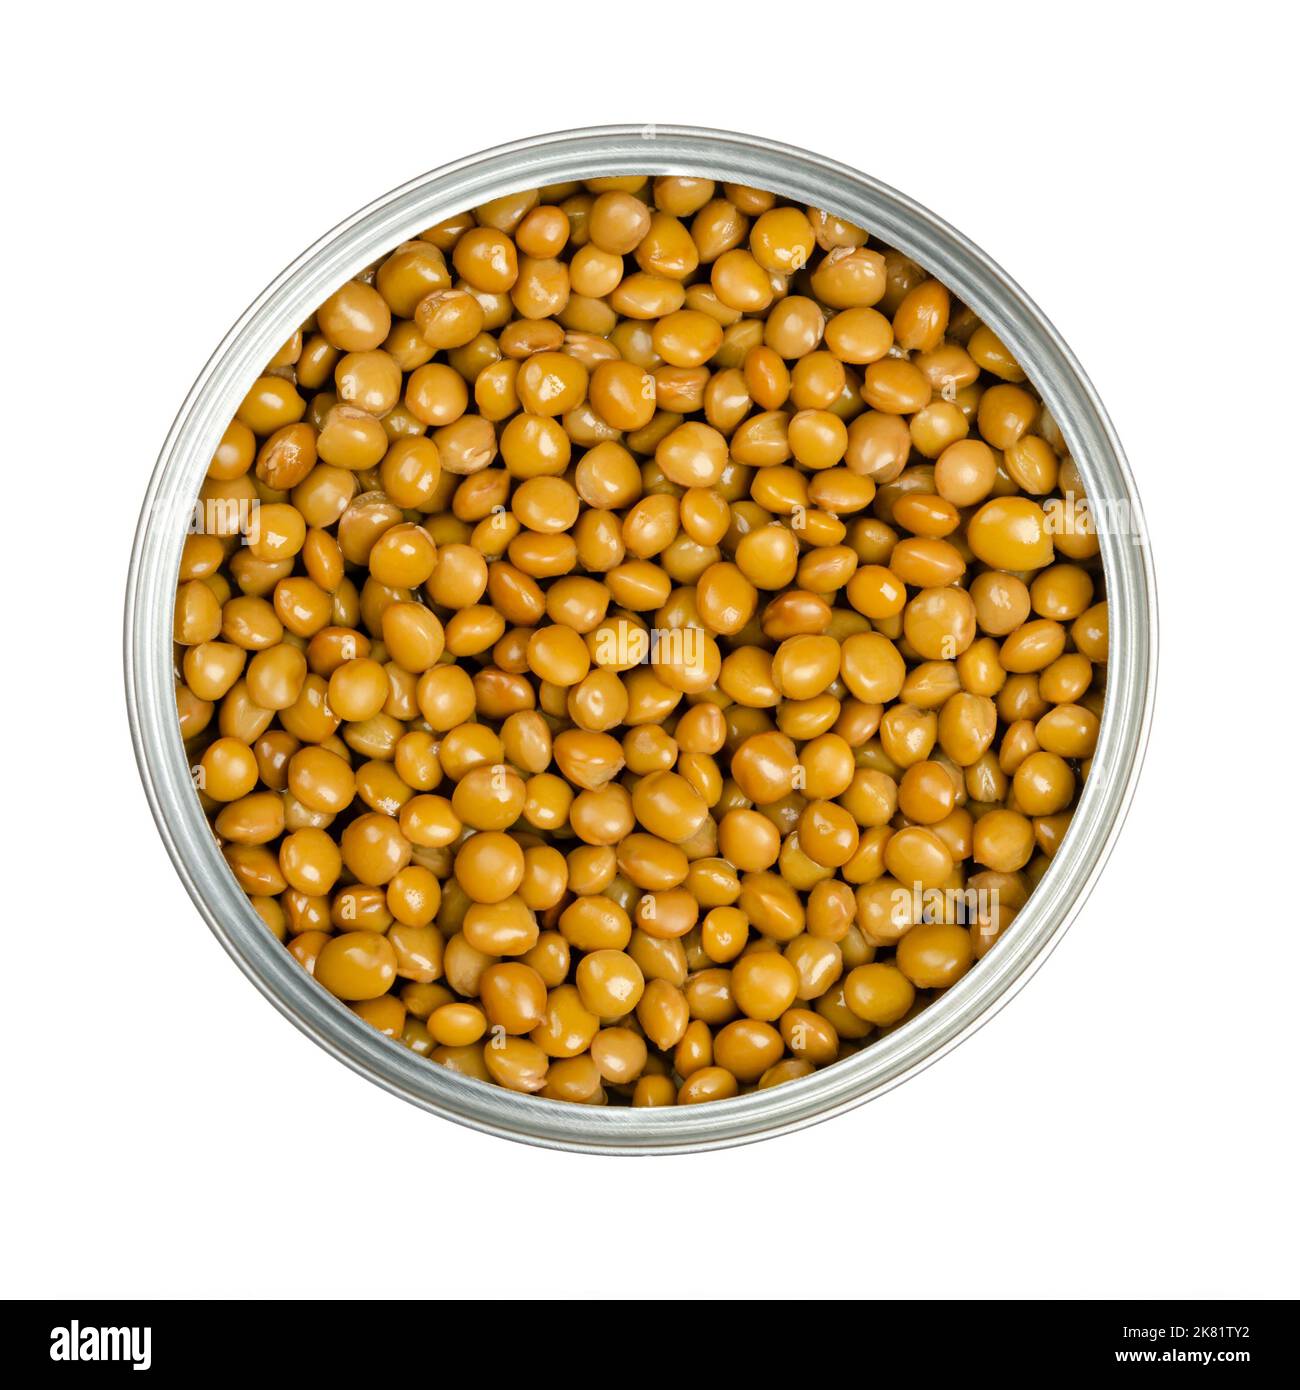 Lentils in an opened can. Cooked and canned small brown lentils, seeds of Lens culinaris, a legume and staple, used for thick curry, gravy or dal. Stock Photo